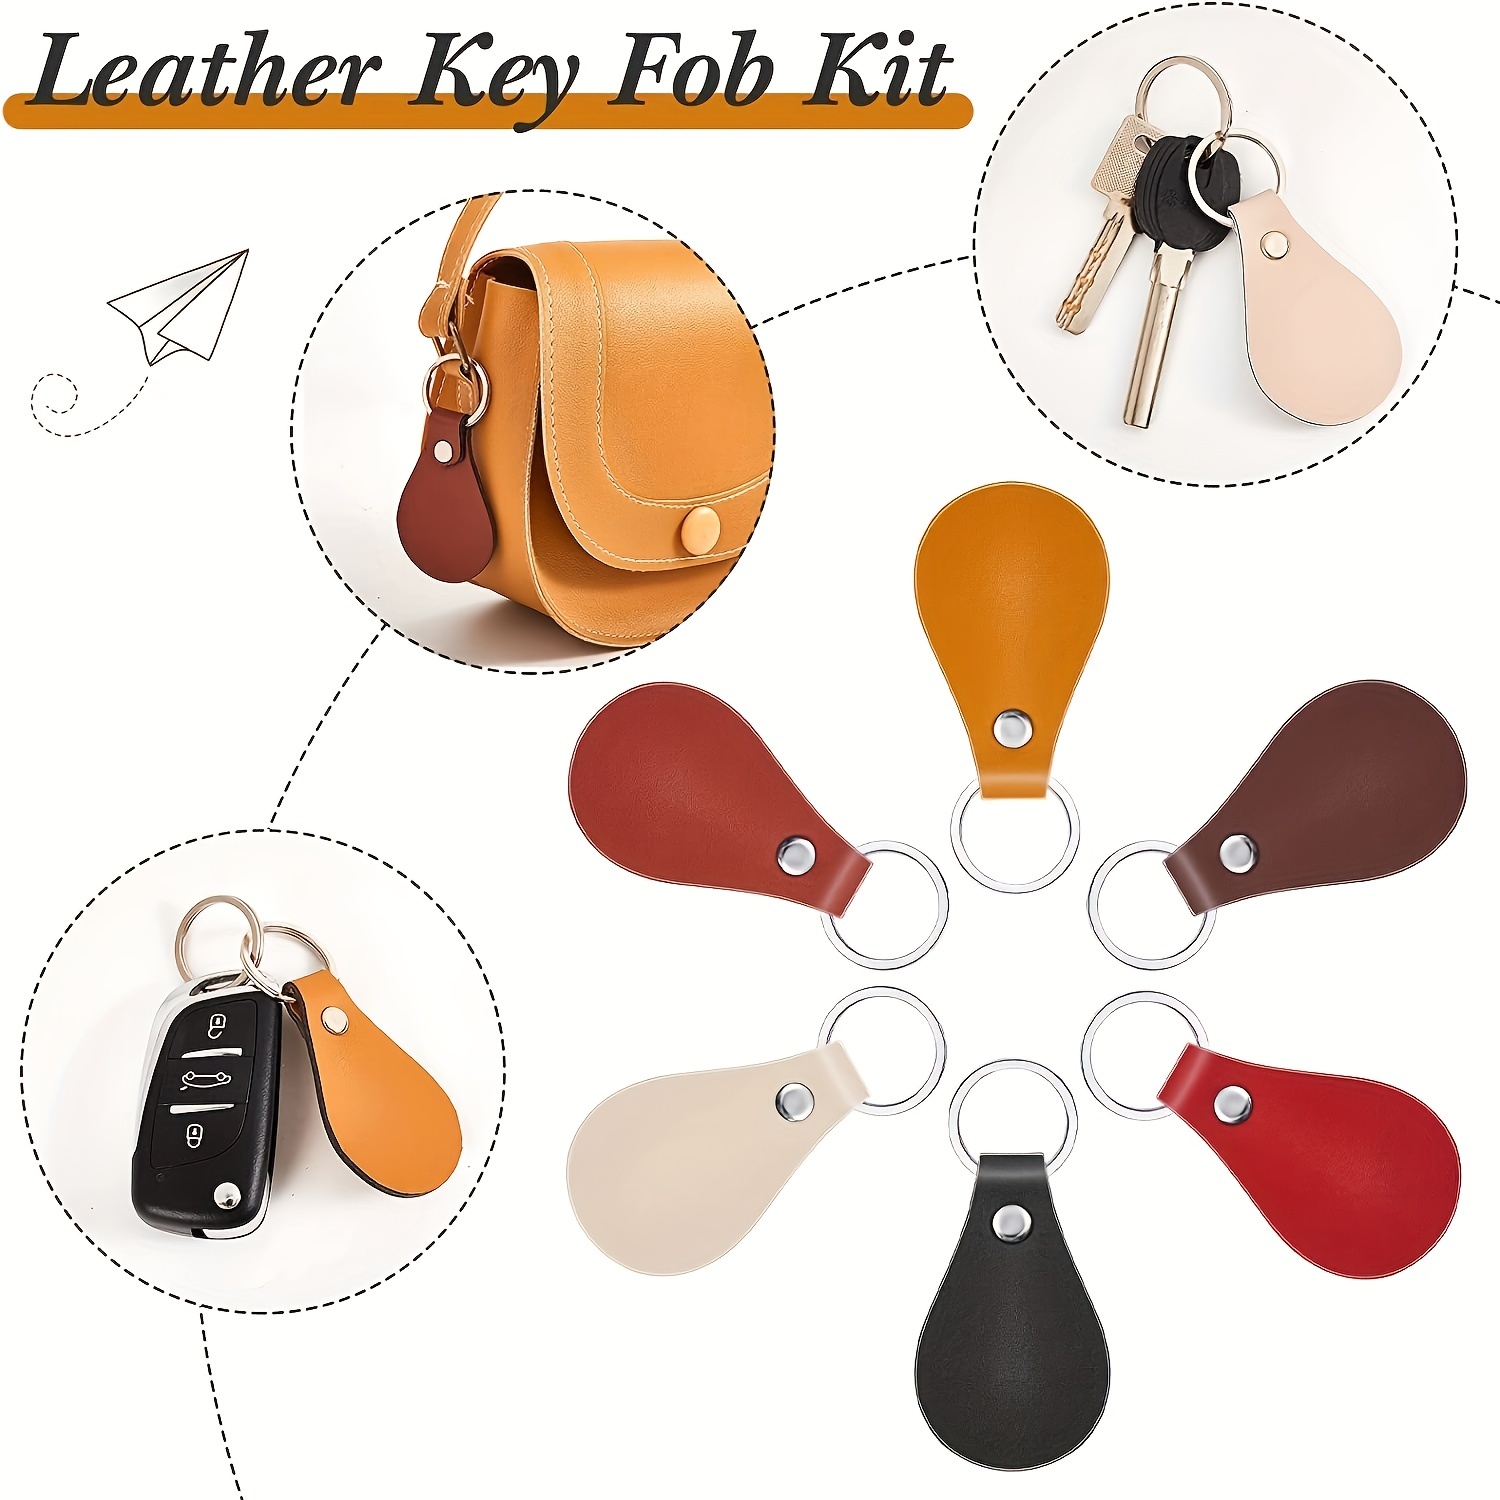 ELLDOO 50 Pcs PU Leather Key Fob Kit for DIY Craft, Leather Key Fobs Blanks  with Rivets and Key Rings for DIY Laser Engraving Keychain Making Leather